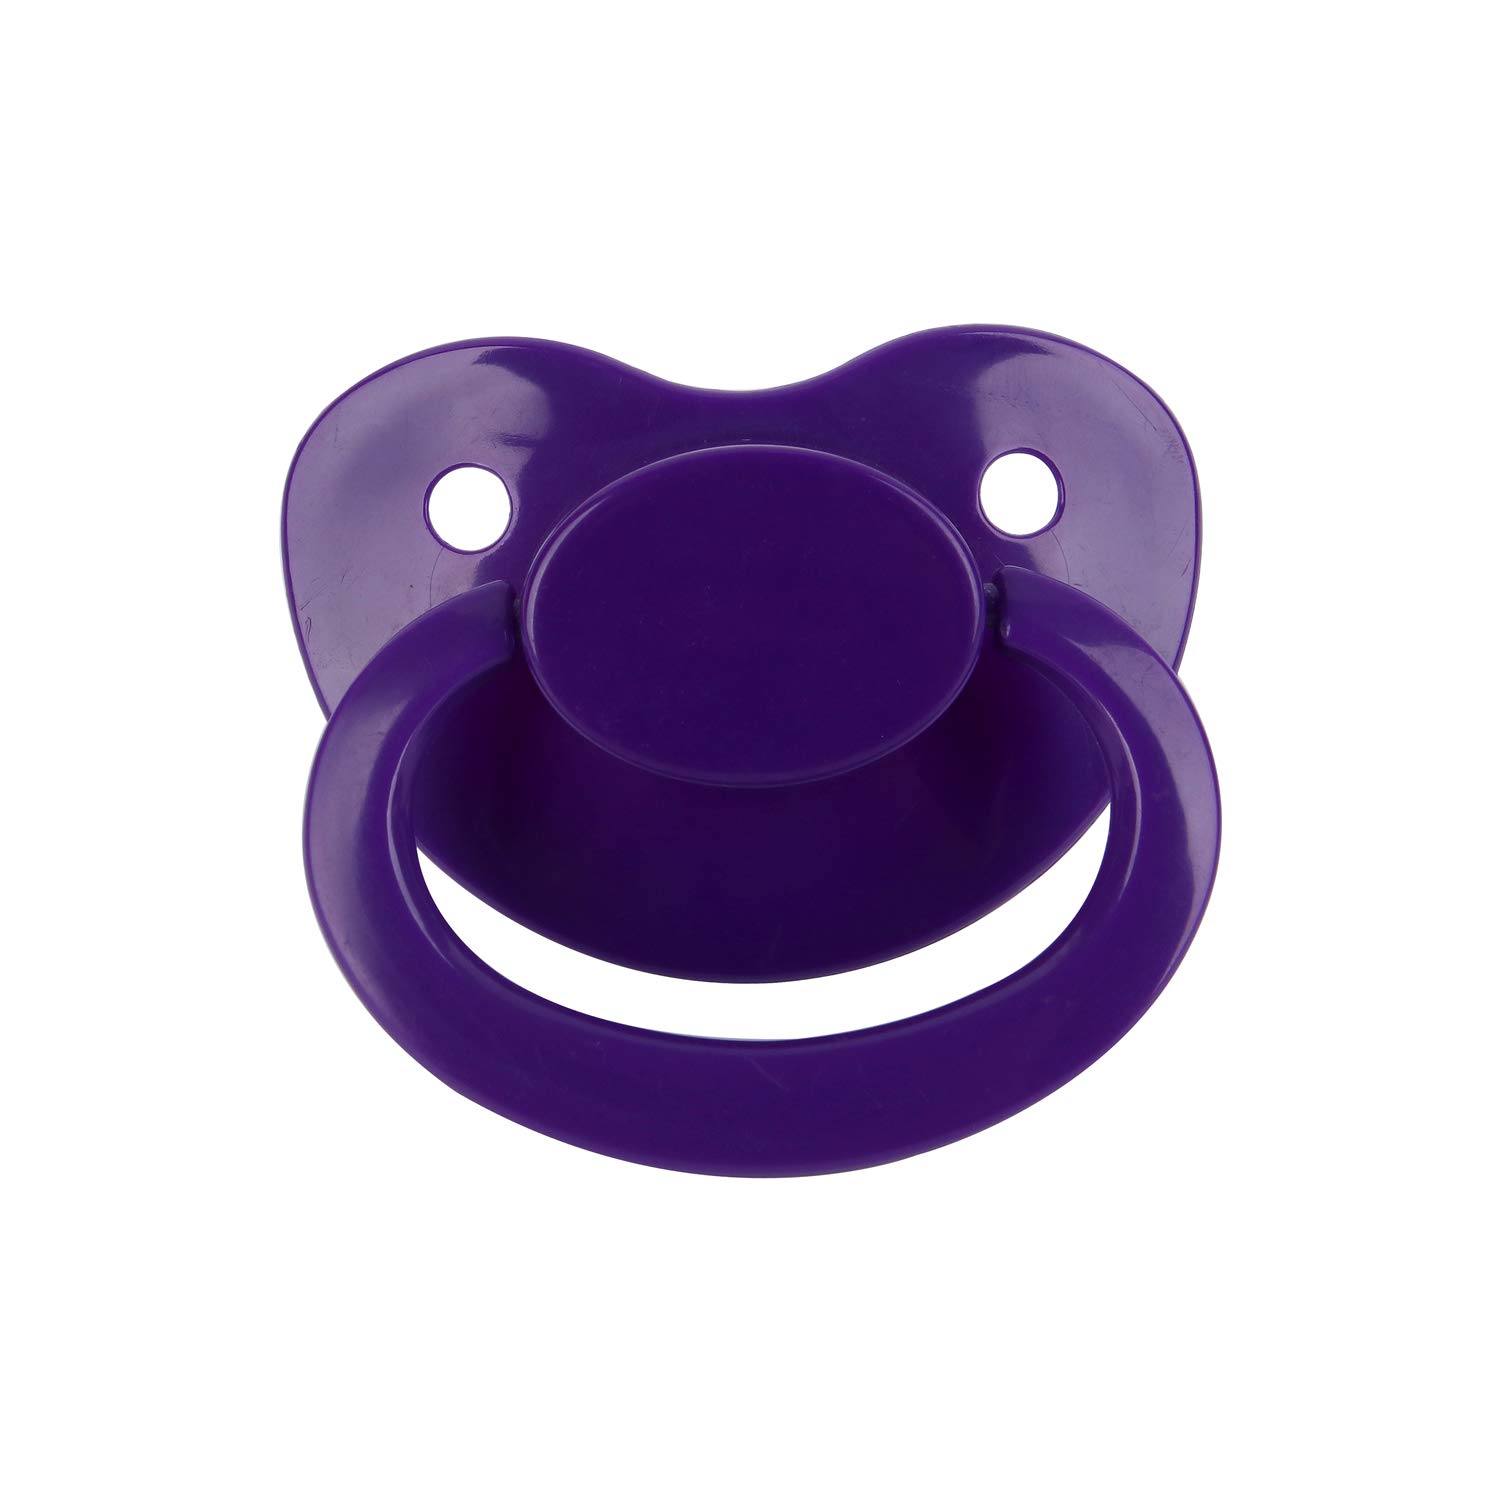 Details about   BigShield Adult Sized Pacifier Candy Gloss Pacifiers 